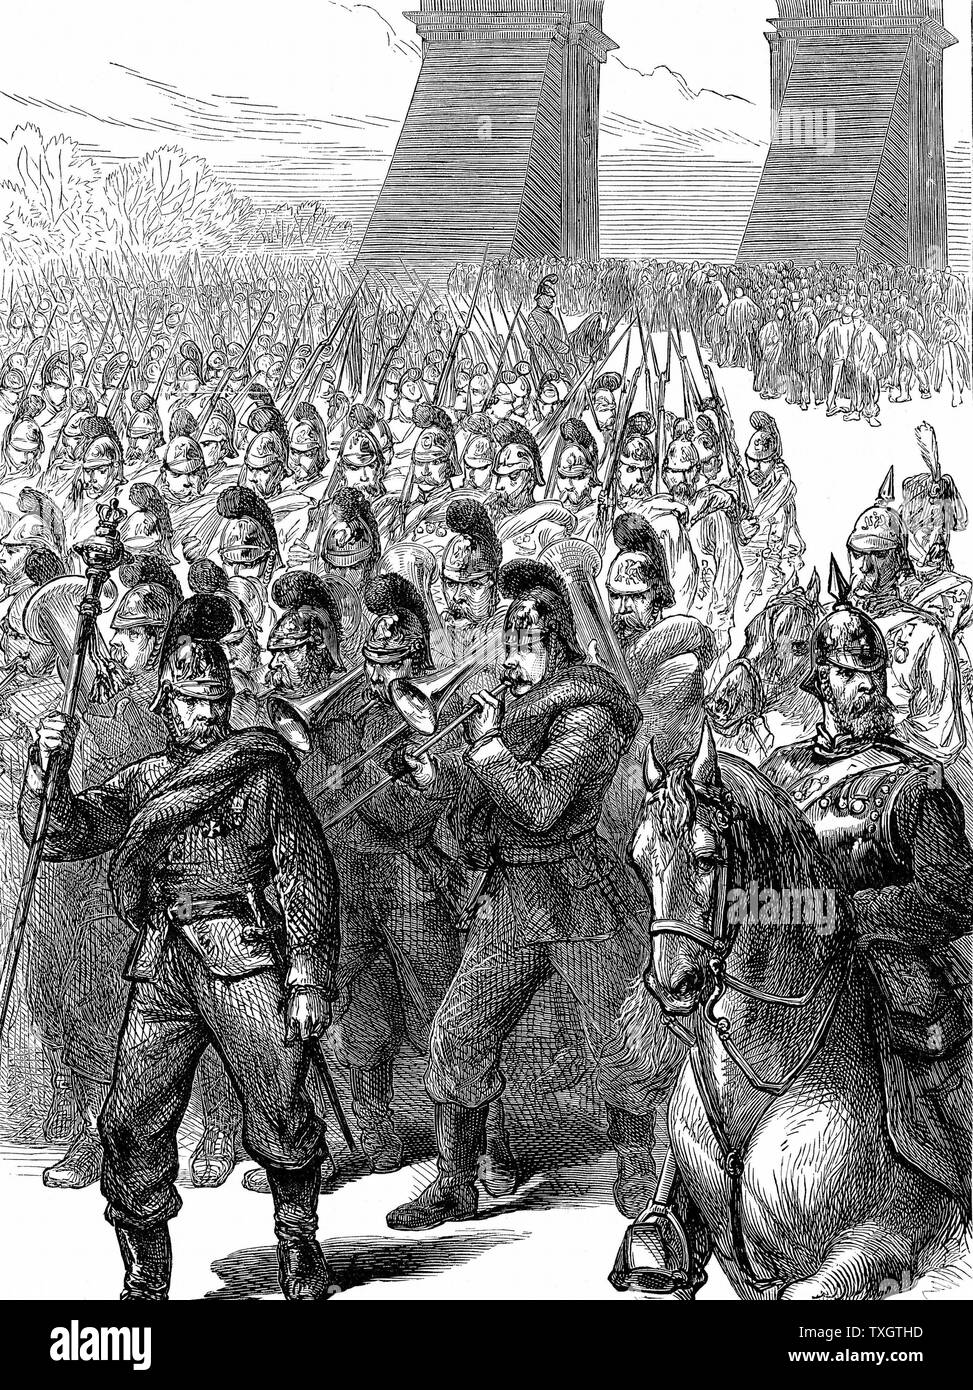 Franco-Prussian War 1870-1871: German troops marching into Paris c1880 Wood engraving Stock Photo